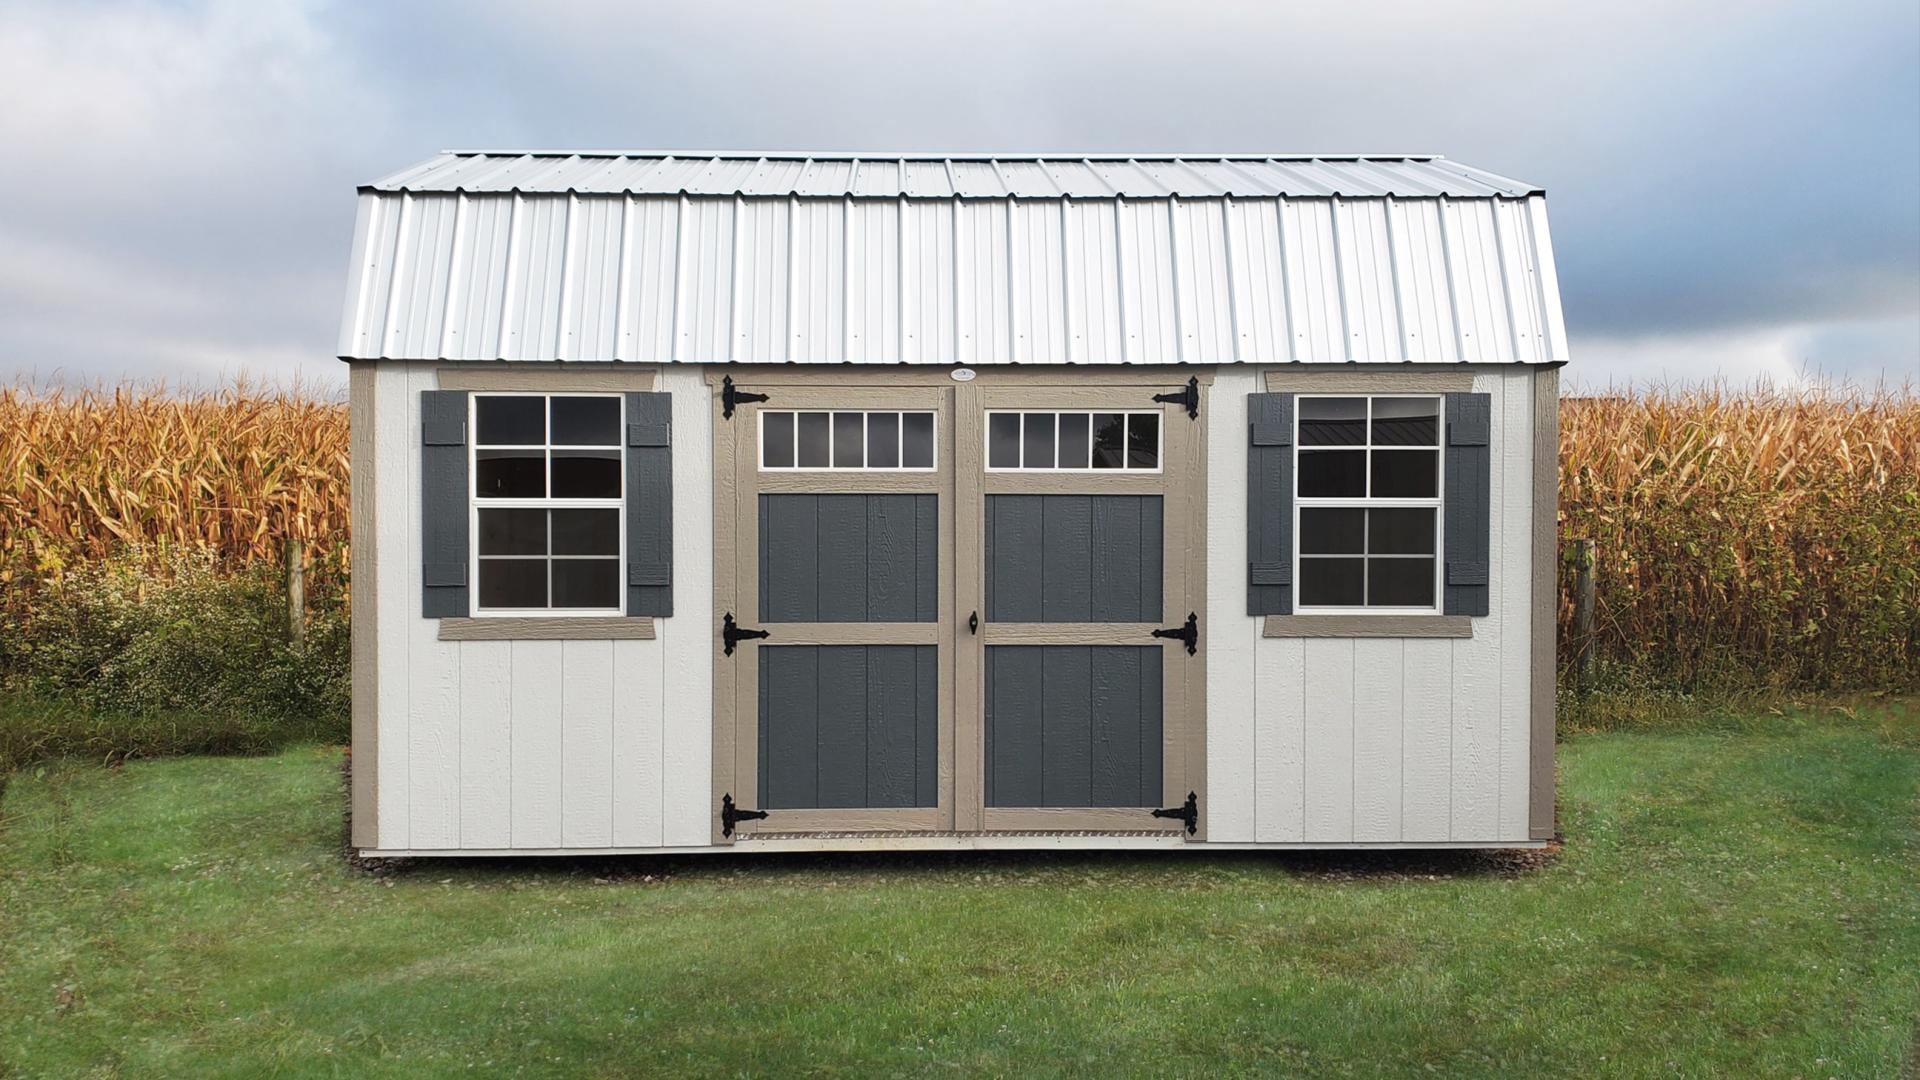 Compass High Barn shed with white siding, tan trim, white metal roofing, blue double doors, and 2 windows with blue shutters sitting in a backyard in front of a cornfield.